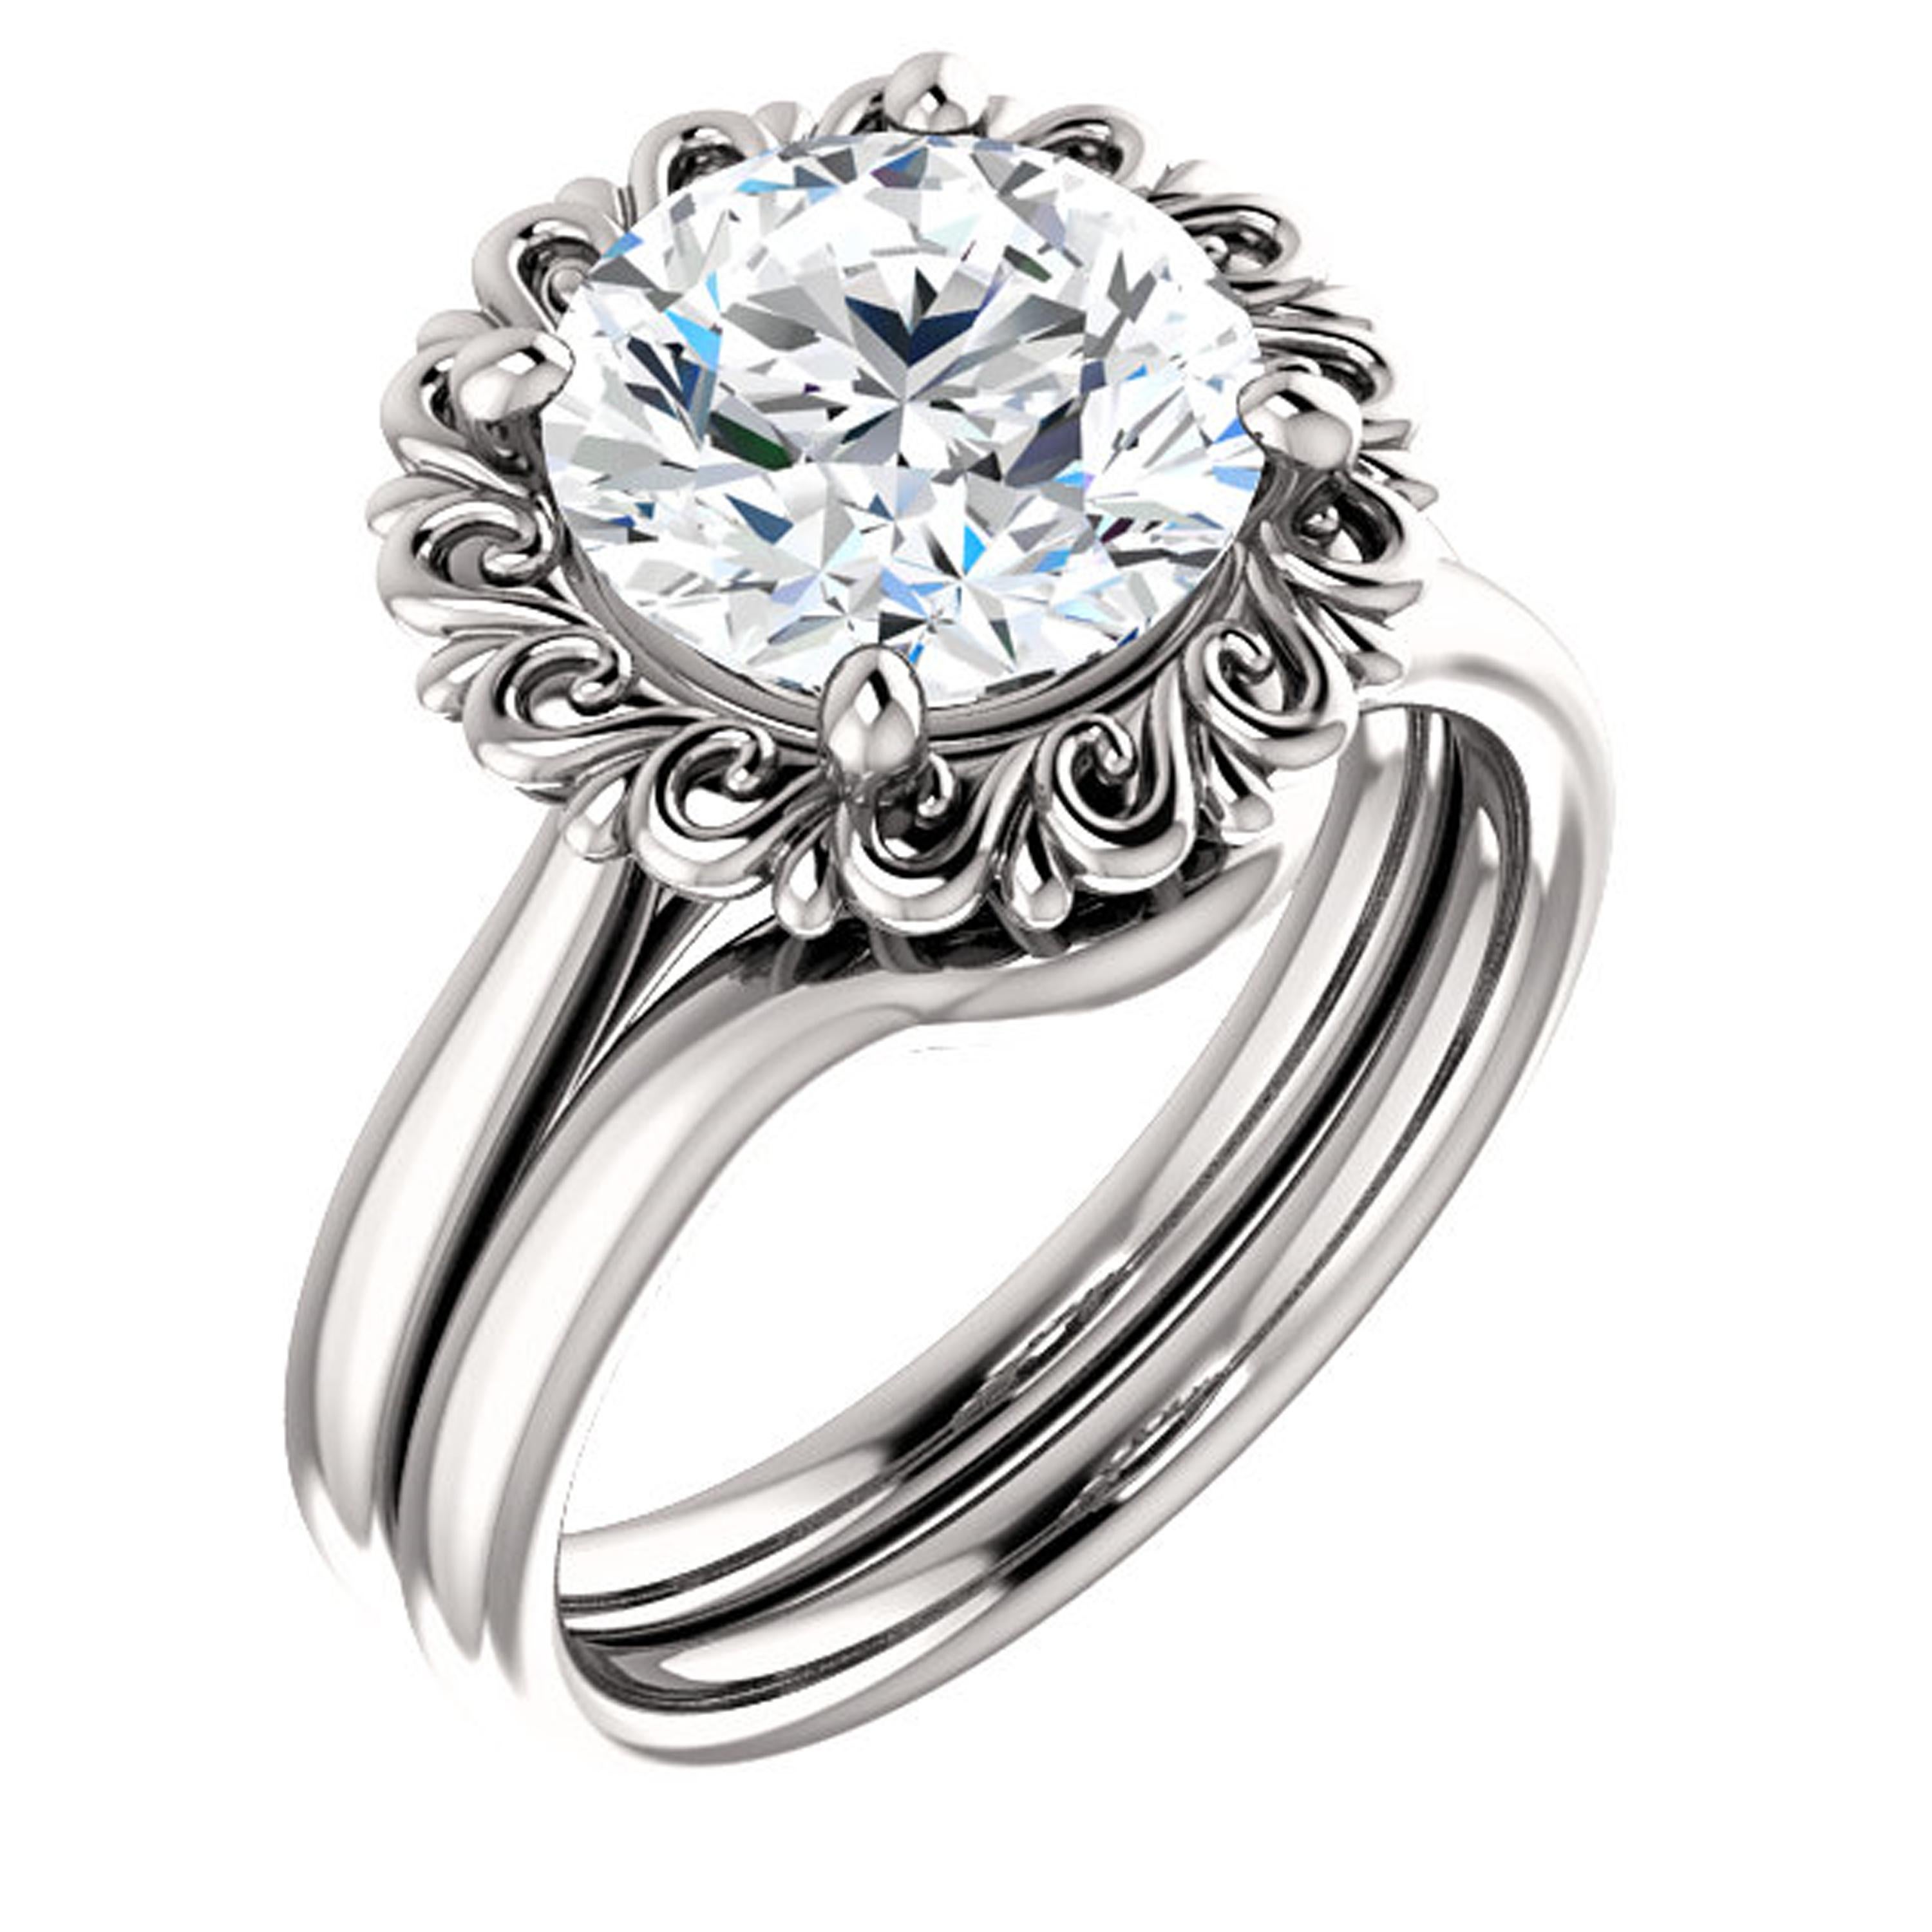 Adorable filigrees decorate the halo of this vintage inspired solitaire style diamond engagement ring. Breathtakingly beautiful, this Valorenna engagement ring is truly one of a kind.

Matching band sold separately.

Center Stone:
1 Round-cut